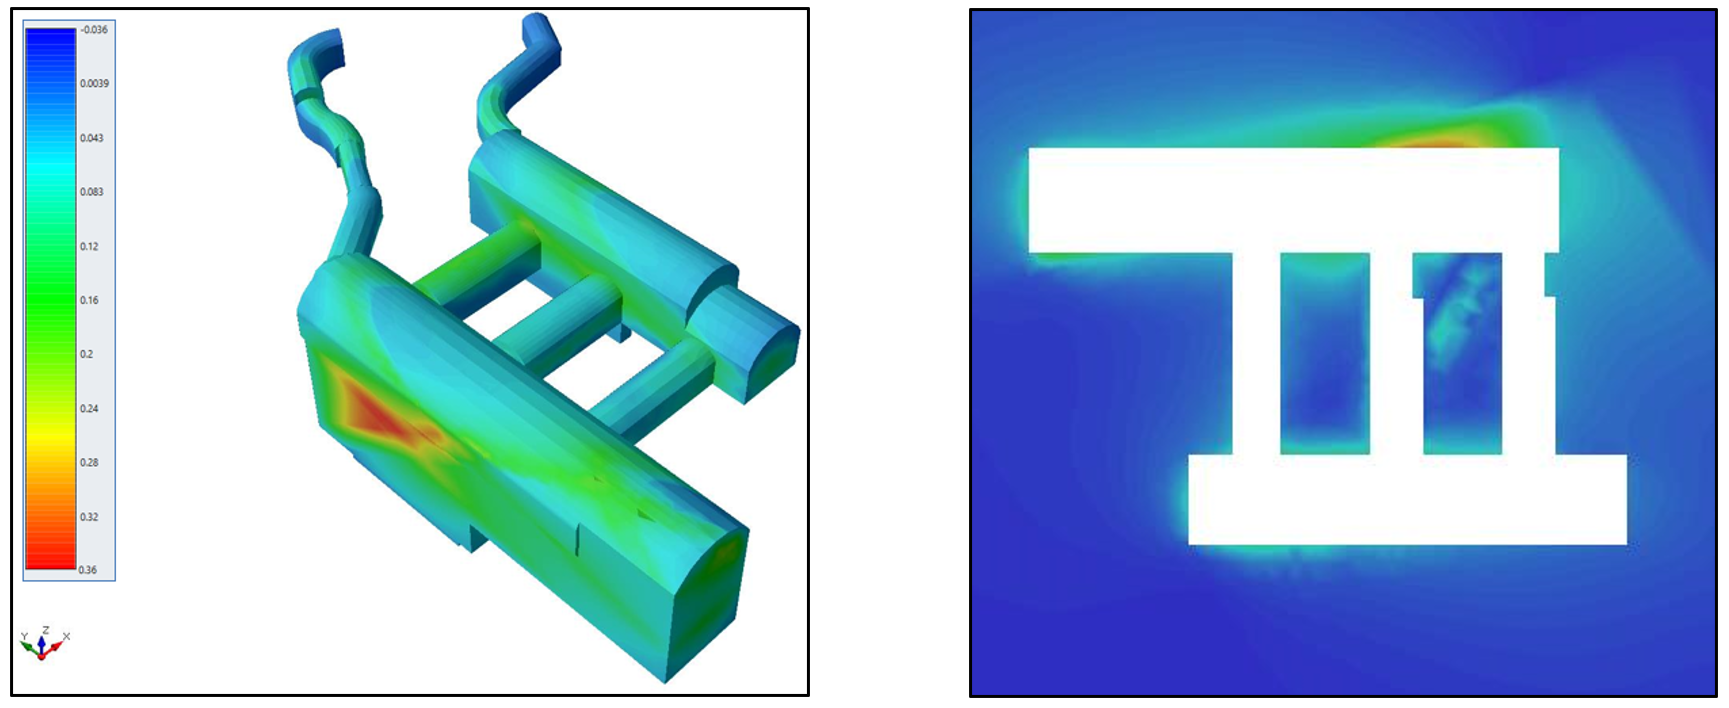 Figure 4: Values of total displacements (expressed in m), perspective (left) and plan (right) views.